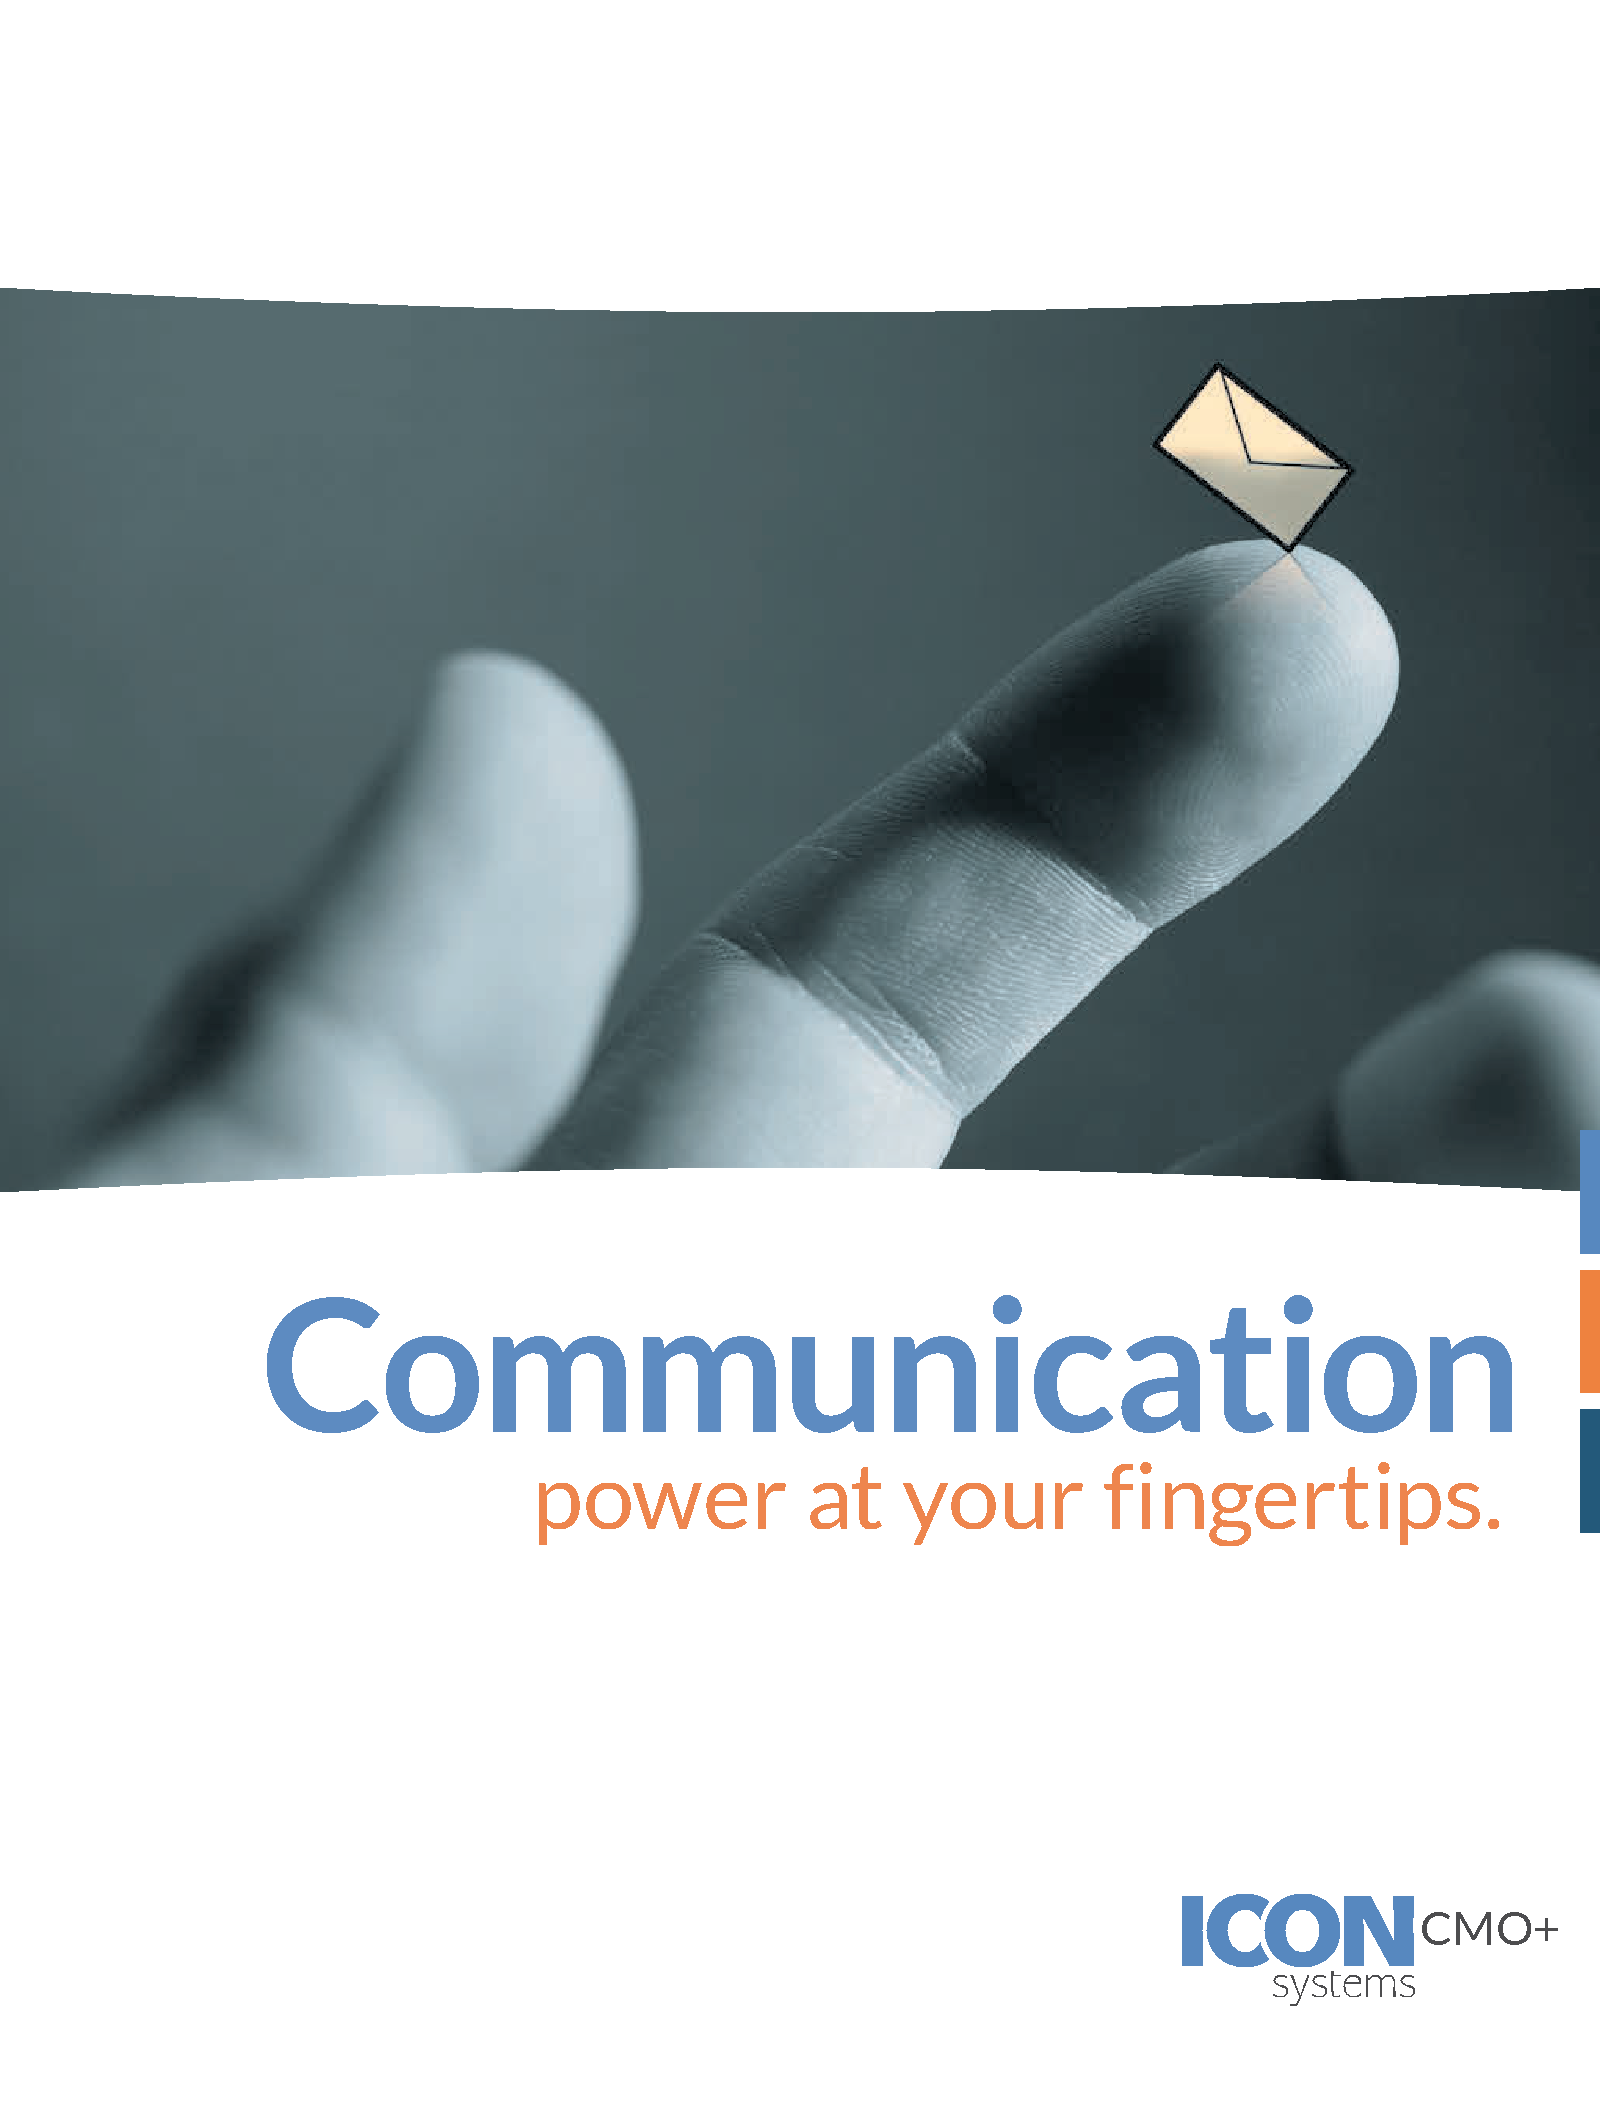 Church communication for the denomination. It shows a finger with an envelope. 